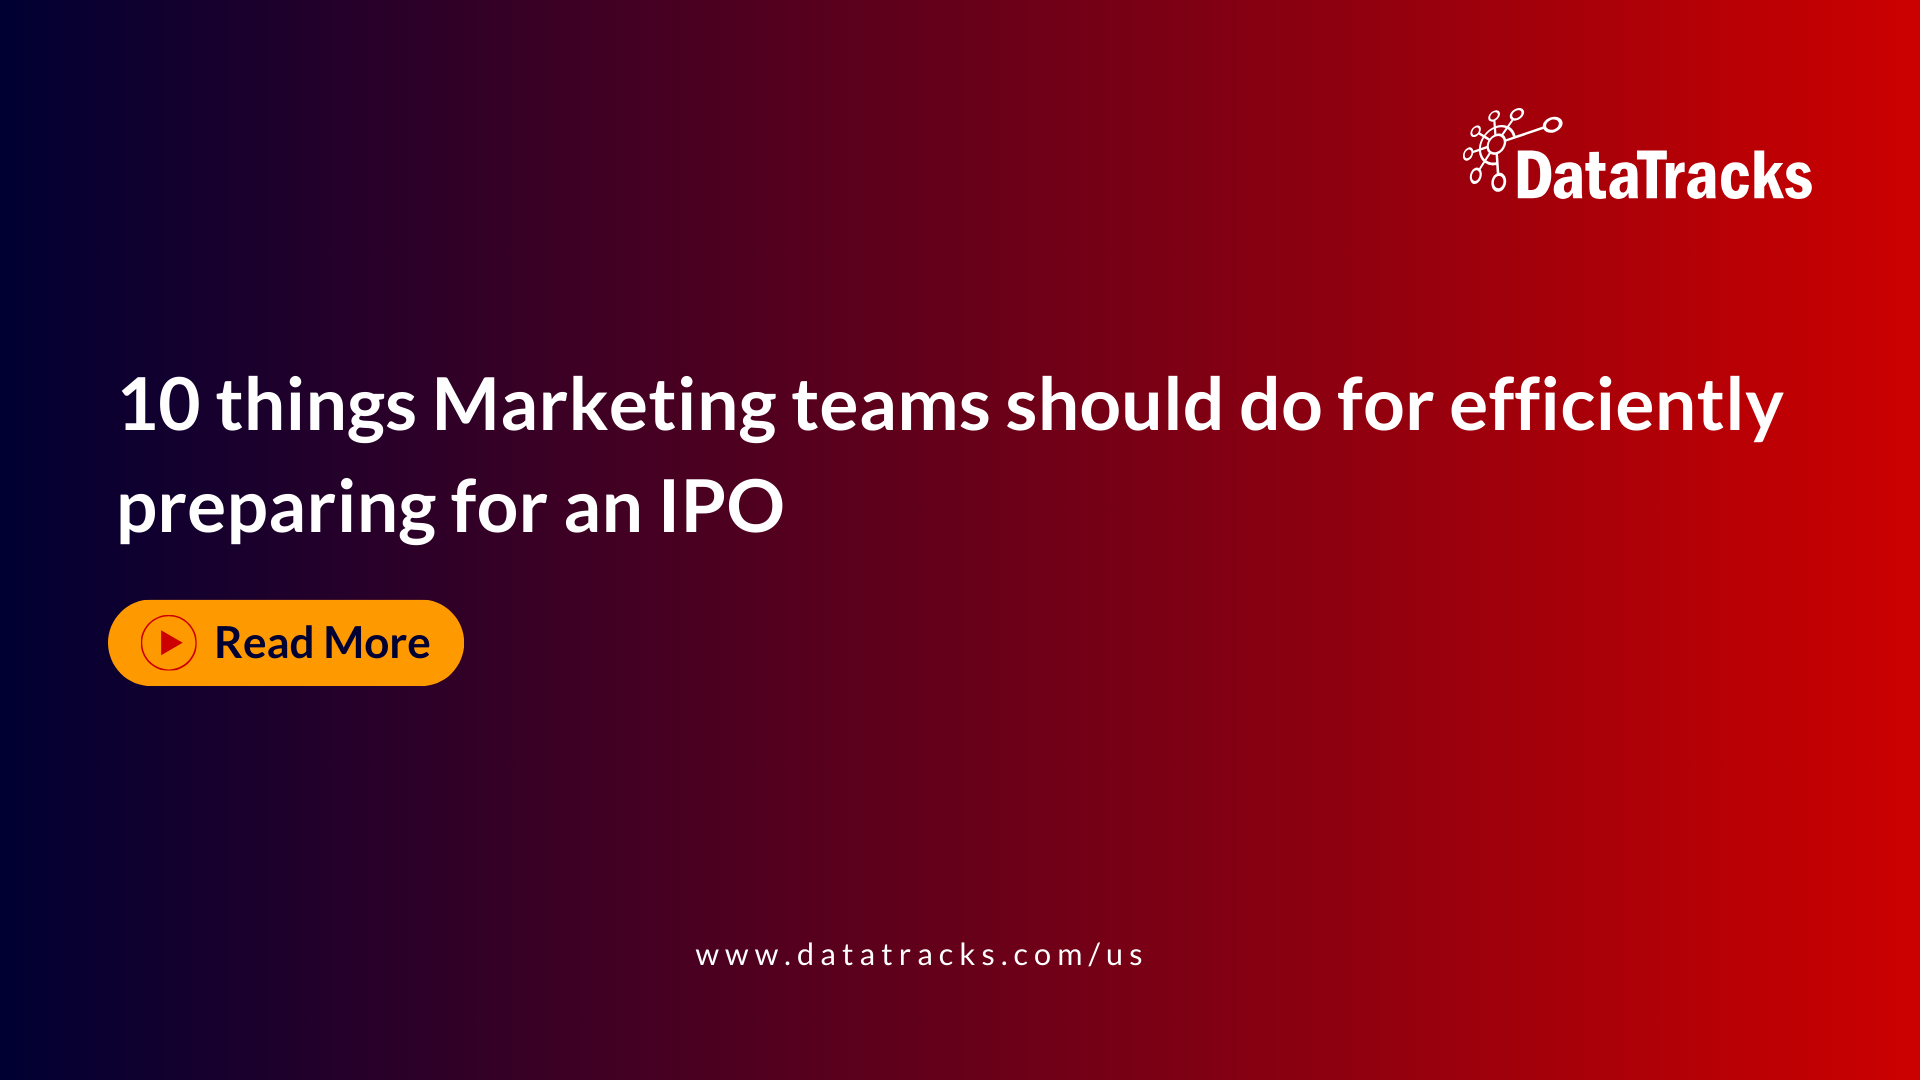 10 things Marketing teams should do for efficiently preparing for an IPO